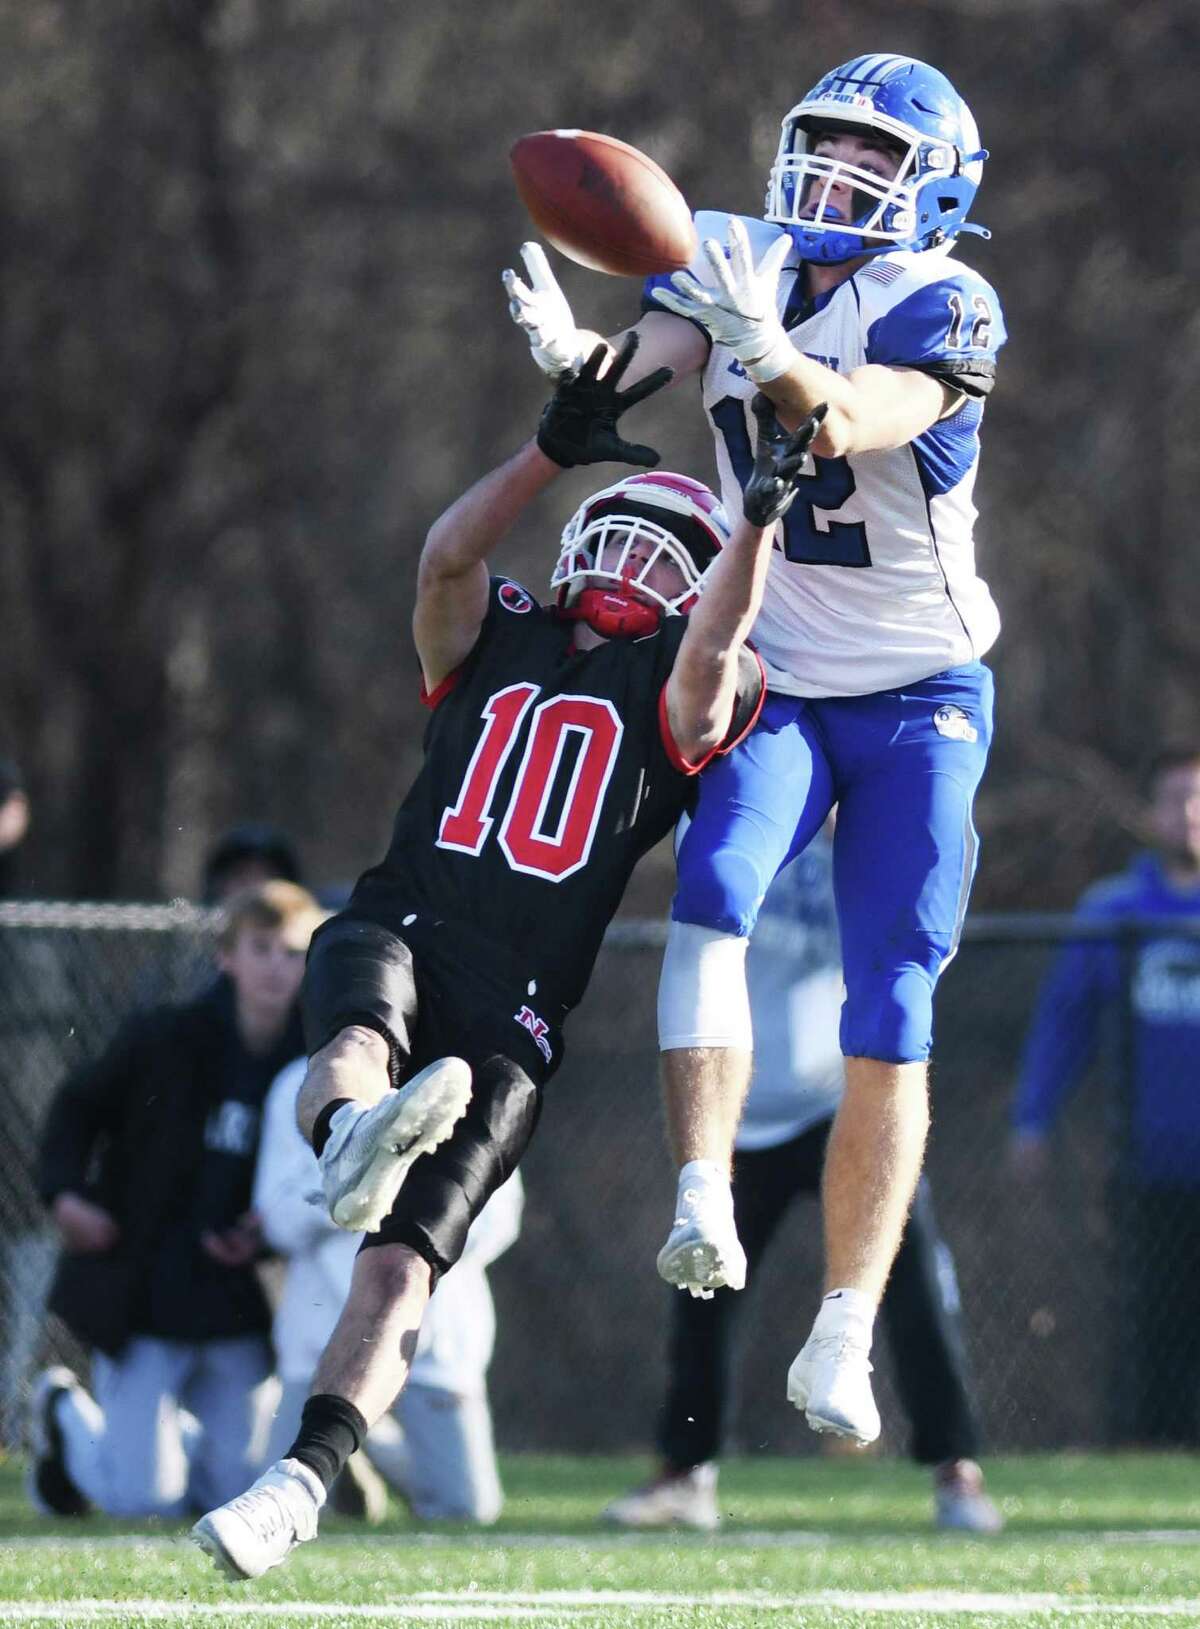 Darien wide receiver John Wilson (12) makes an acrobatic catch over New Canaan defensive back Christopher Bopp (10) in No. 3 Darien’s 24-10 win over No. 2 New Canaan in the CIAC Class LL high school football semifinal at New Canaan High School onSunday, Dec. 5.